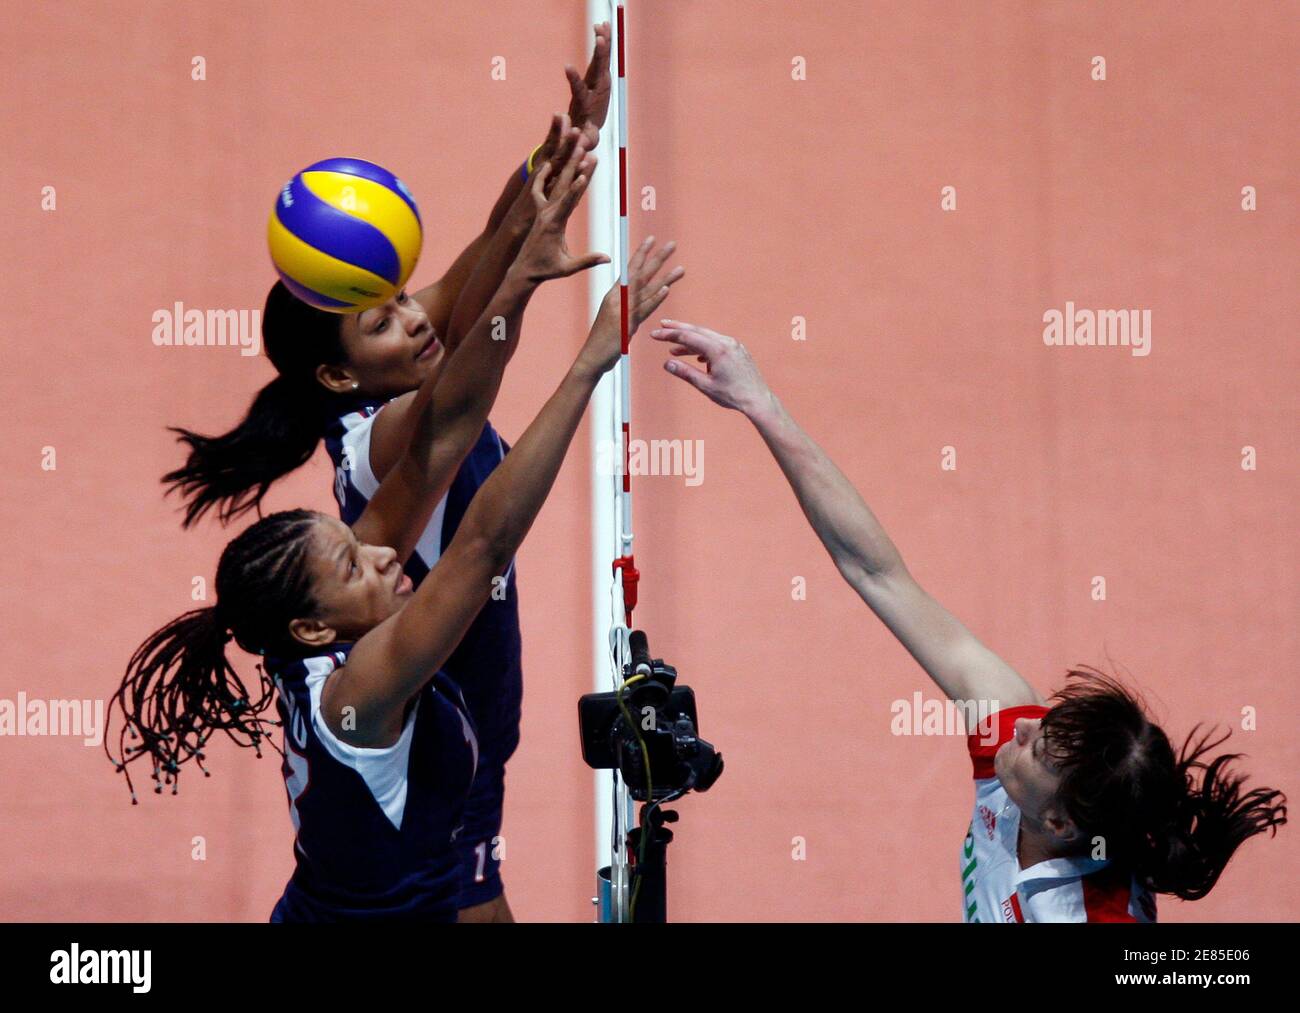 Annerys Vargas Valdez (top L) and Altagracia Mambru of the Dominican Republic reach for the ball against Anna Wozniakowska (R) of Poland during their FIVB World Grand Prix women's volleyball tournament in Hong Kong August 16, 2009. REUTERS/Tyrone Siu    (CHINA SPORT VOLLEYBALL) Stock Photo